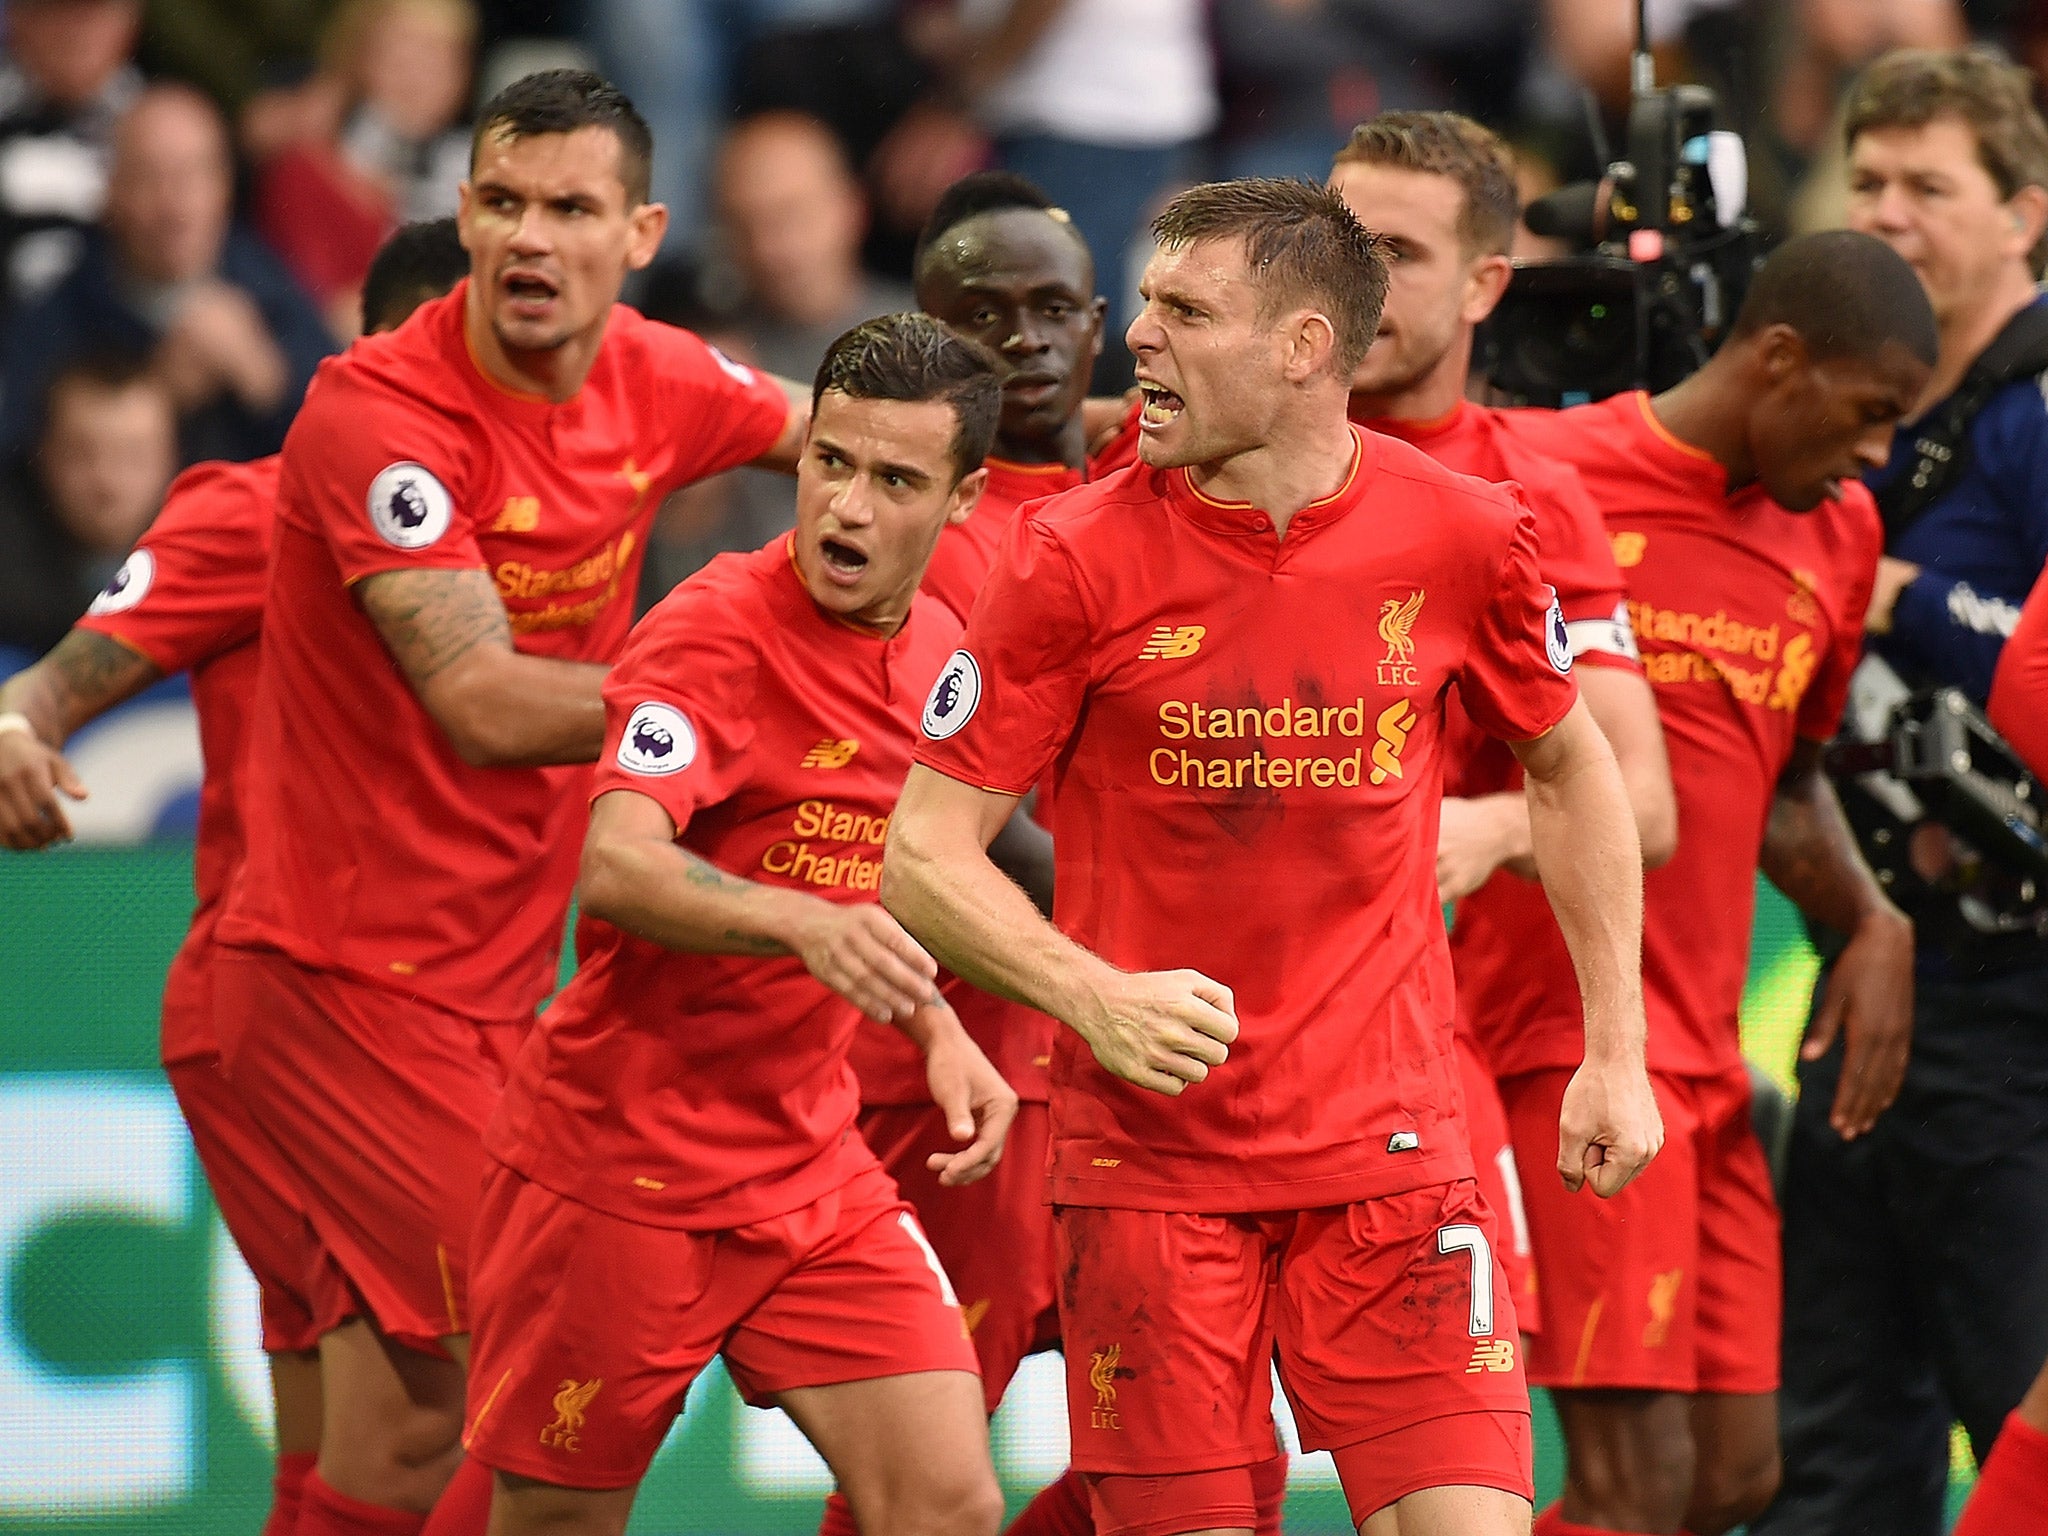 Liverpool will have their shirt sponsor changed for the clash with Manchester United